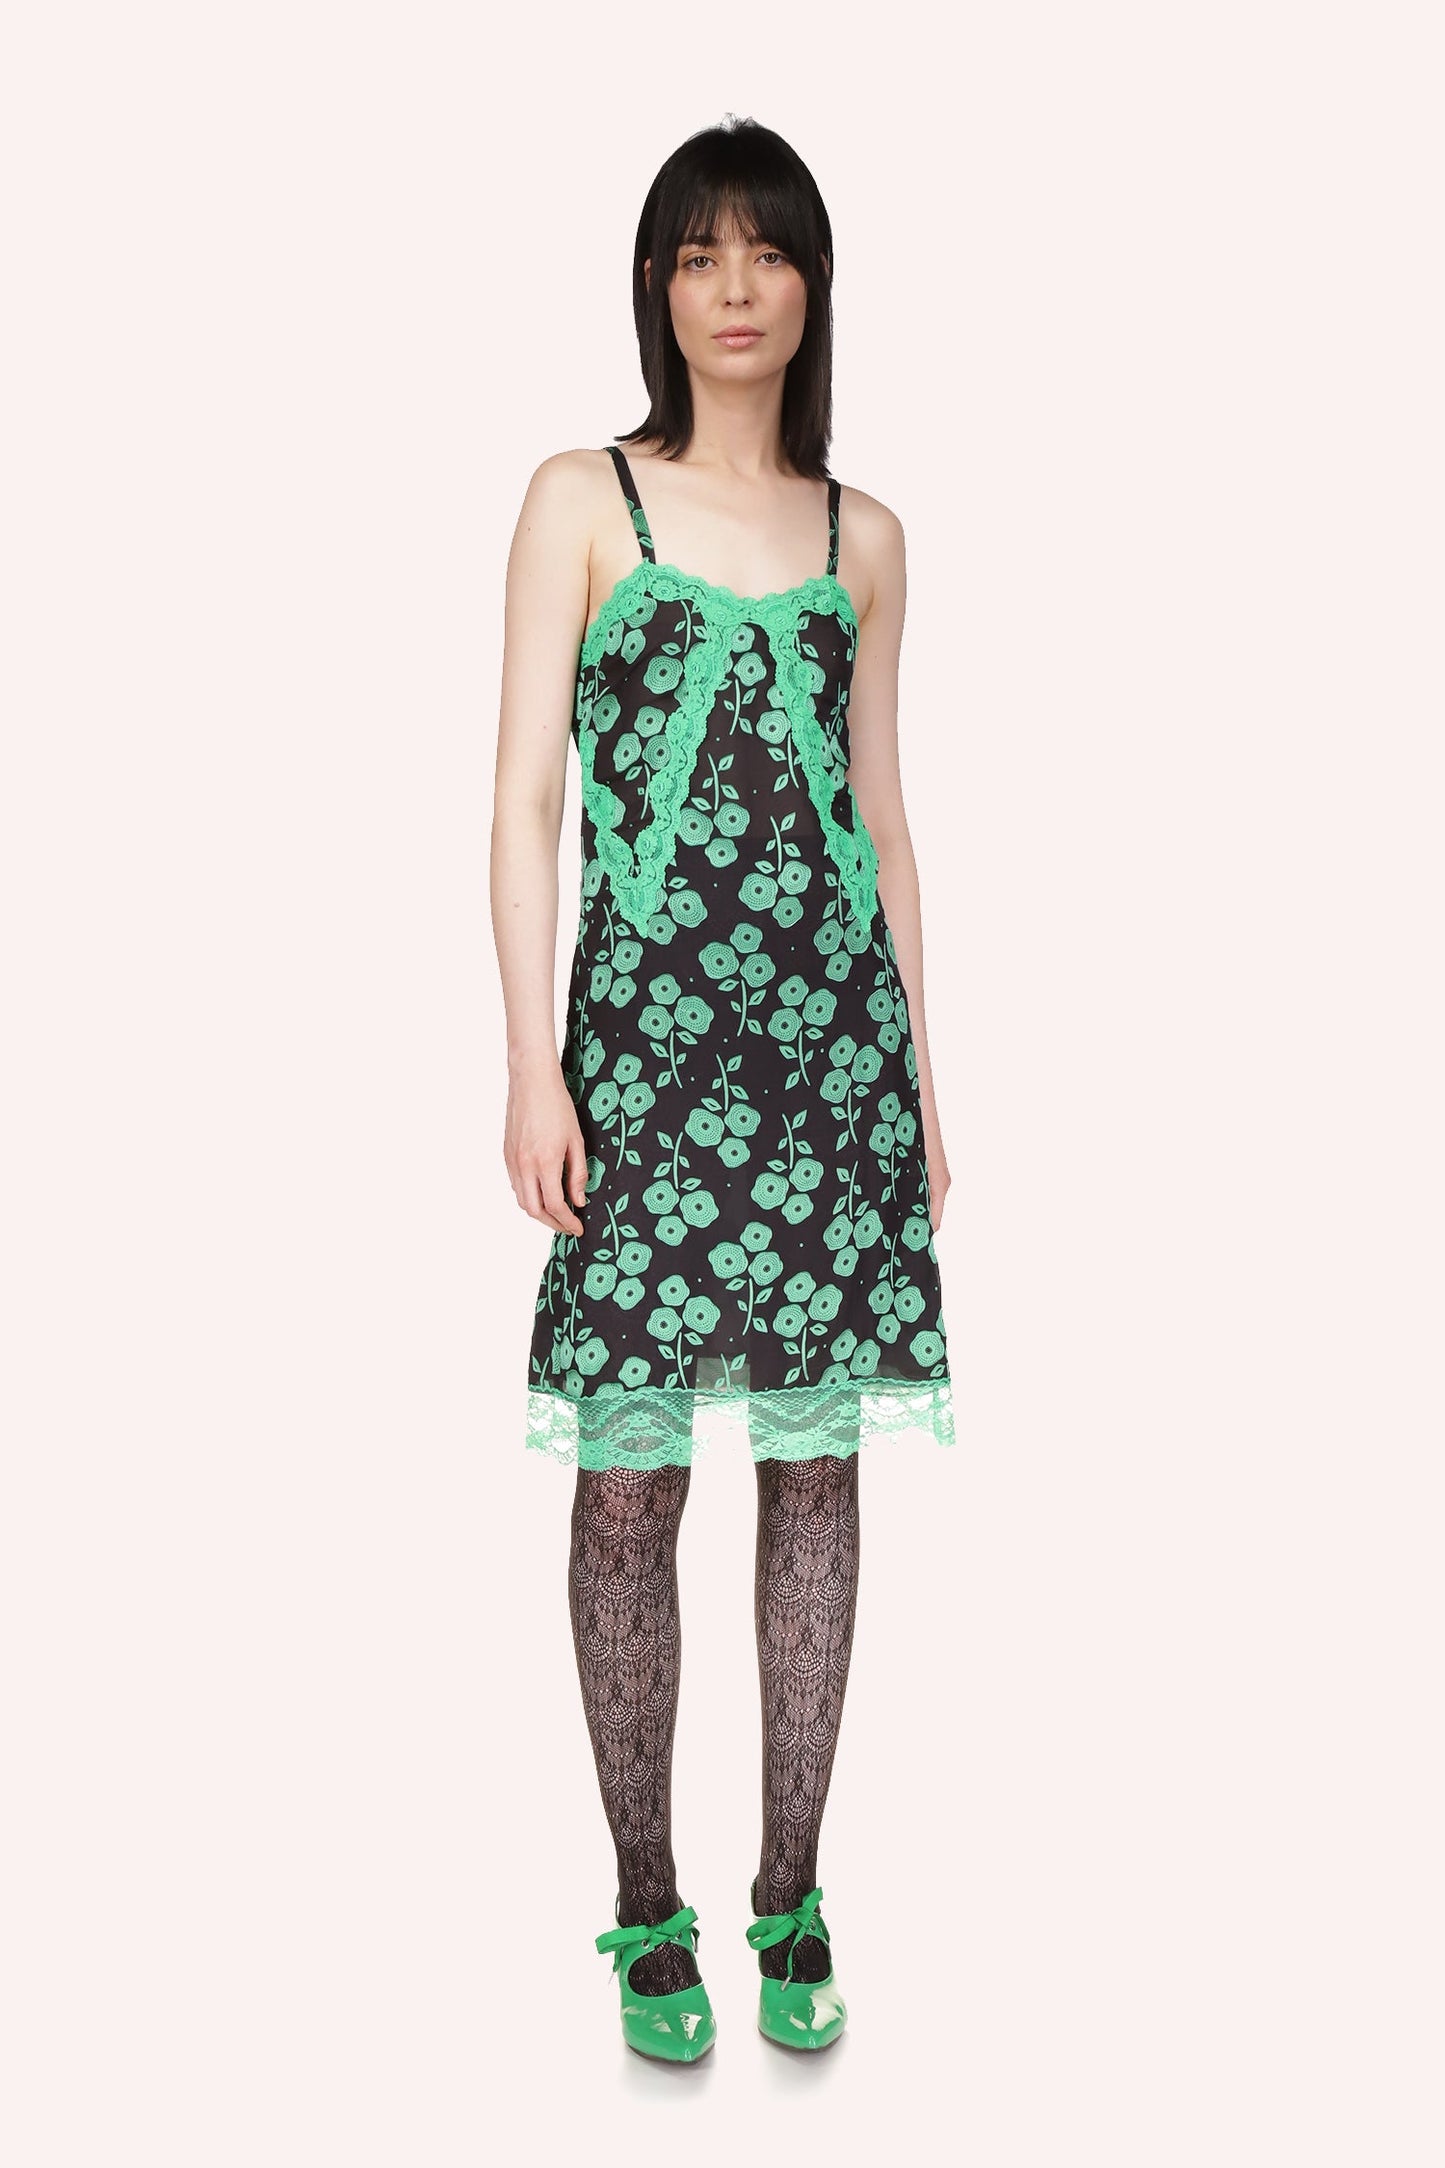 Green floral dress, green v-lace, sleeveless, 2-straps, knees-long, bottom translucent green lace